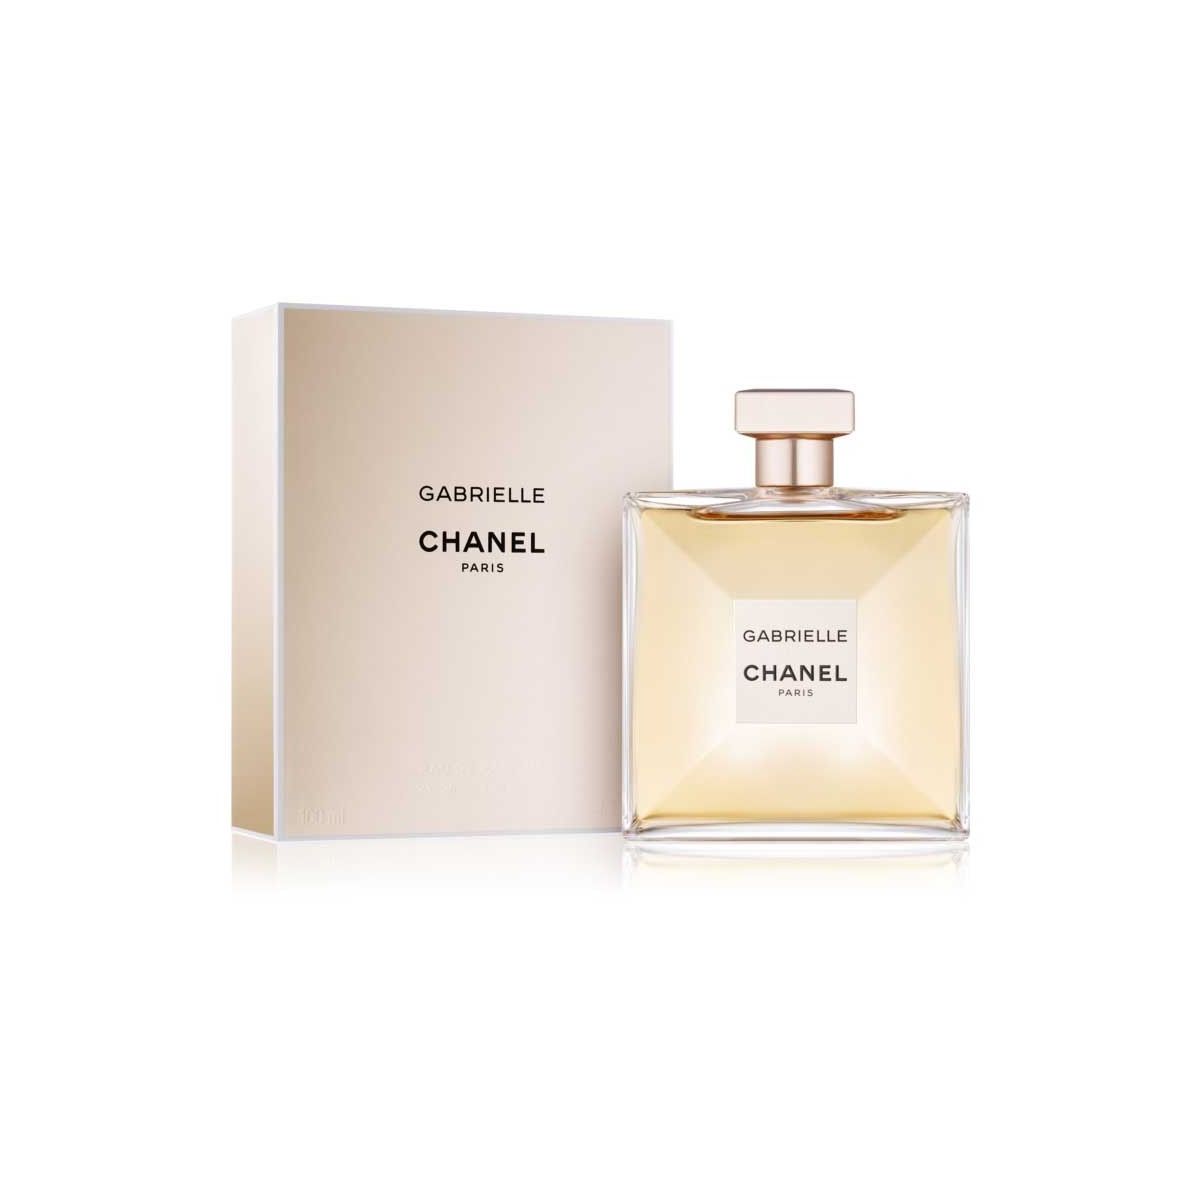 NEW Chanel Fragrance  Gabrielle Chanel Eau de Parfum Review  The Happy  Sloths Beauty Makeup and Skincare Blog with Reviews and Swatches